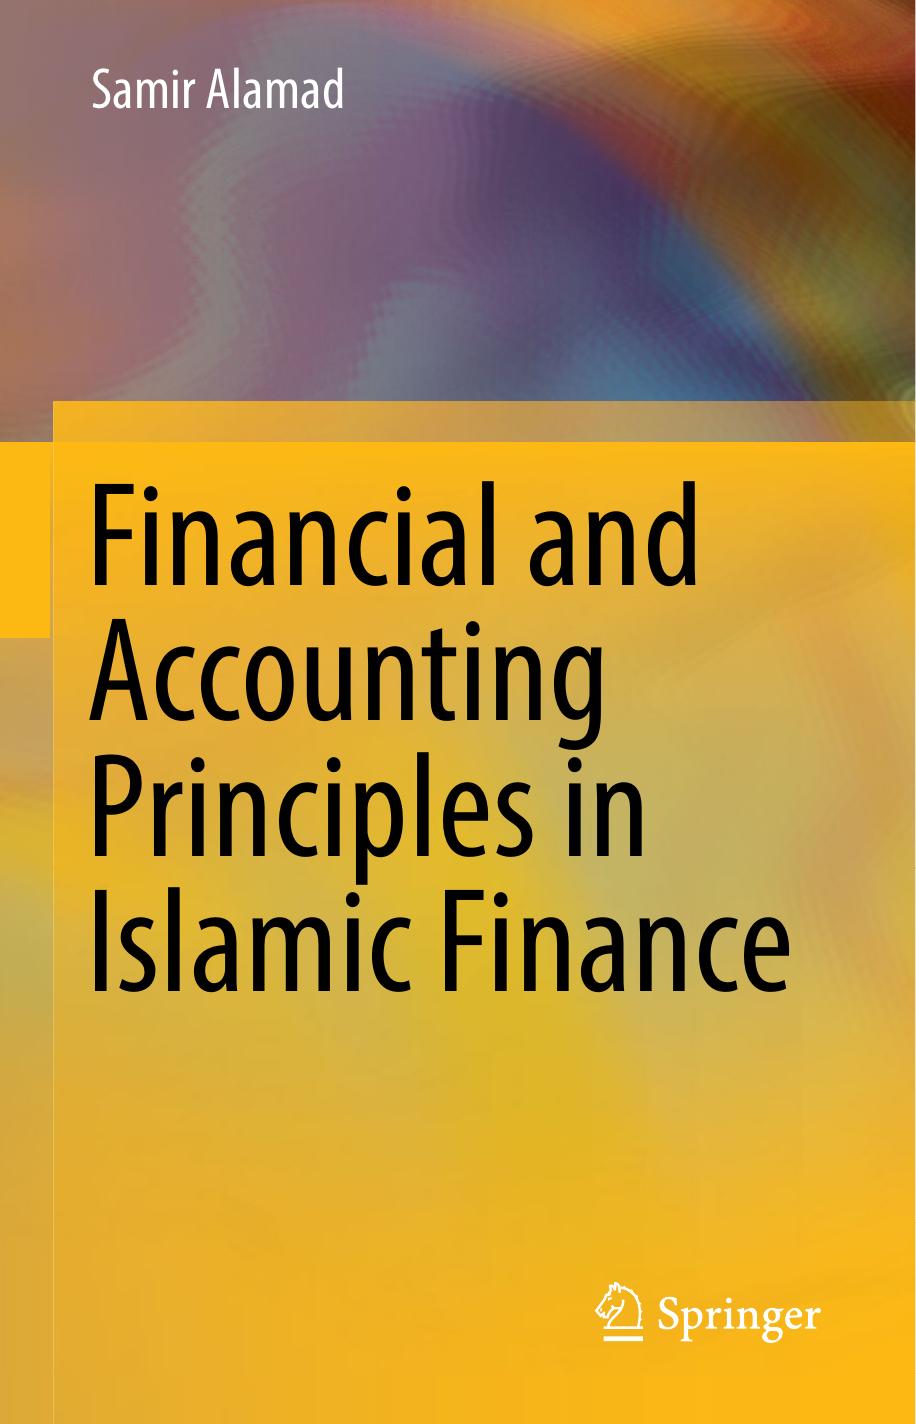 Financial and Accounting Principles in Islamic Finance ( PDFDrive ) 2019